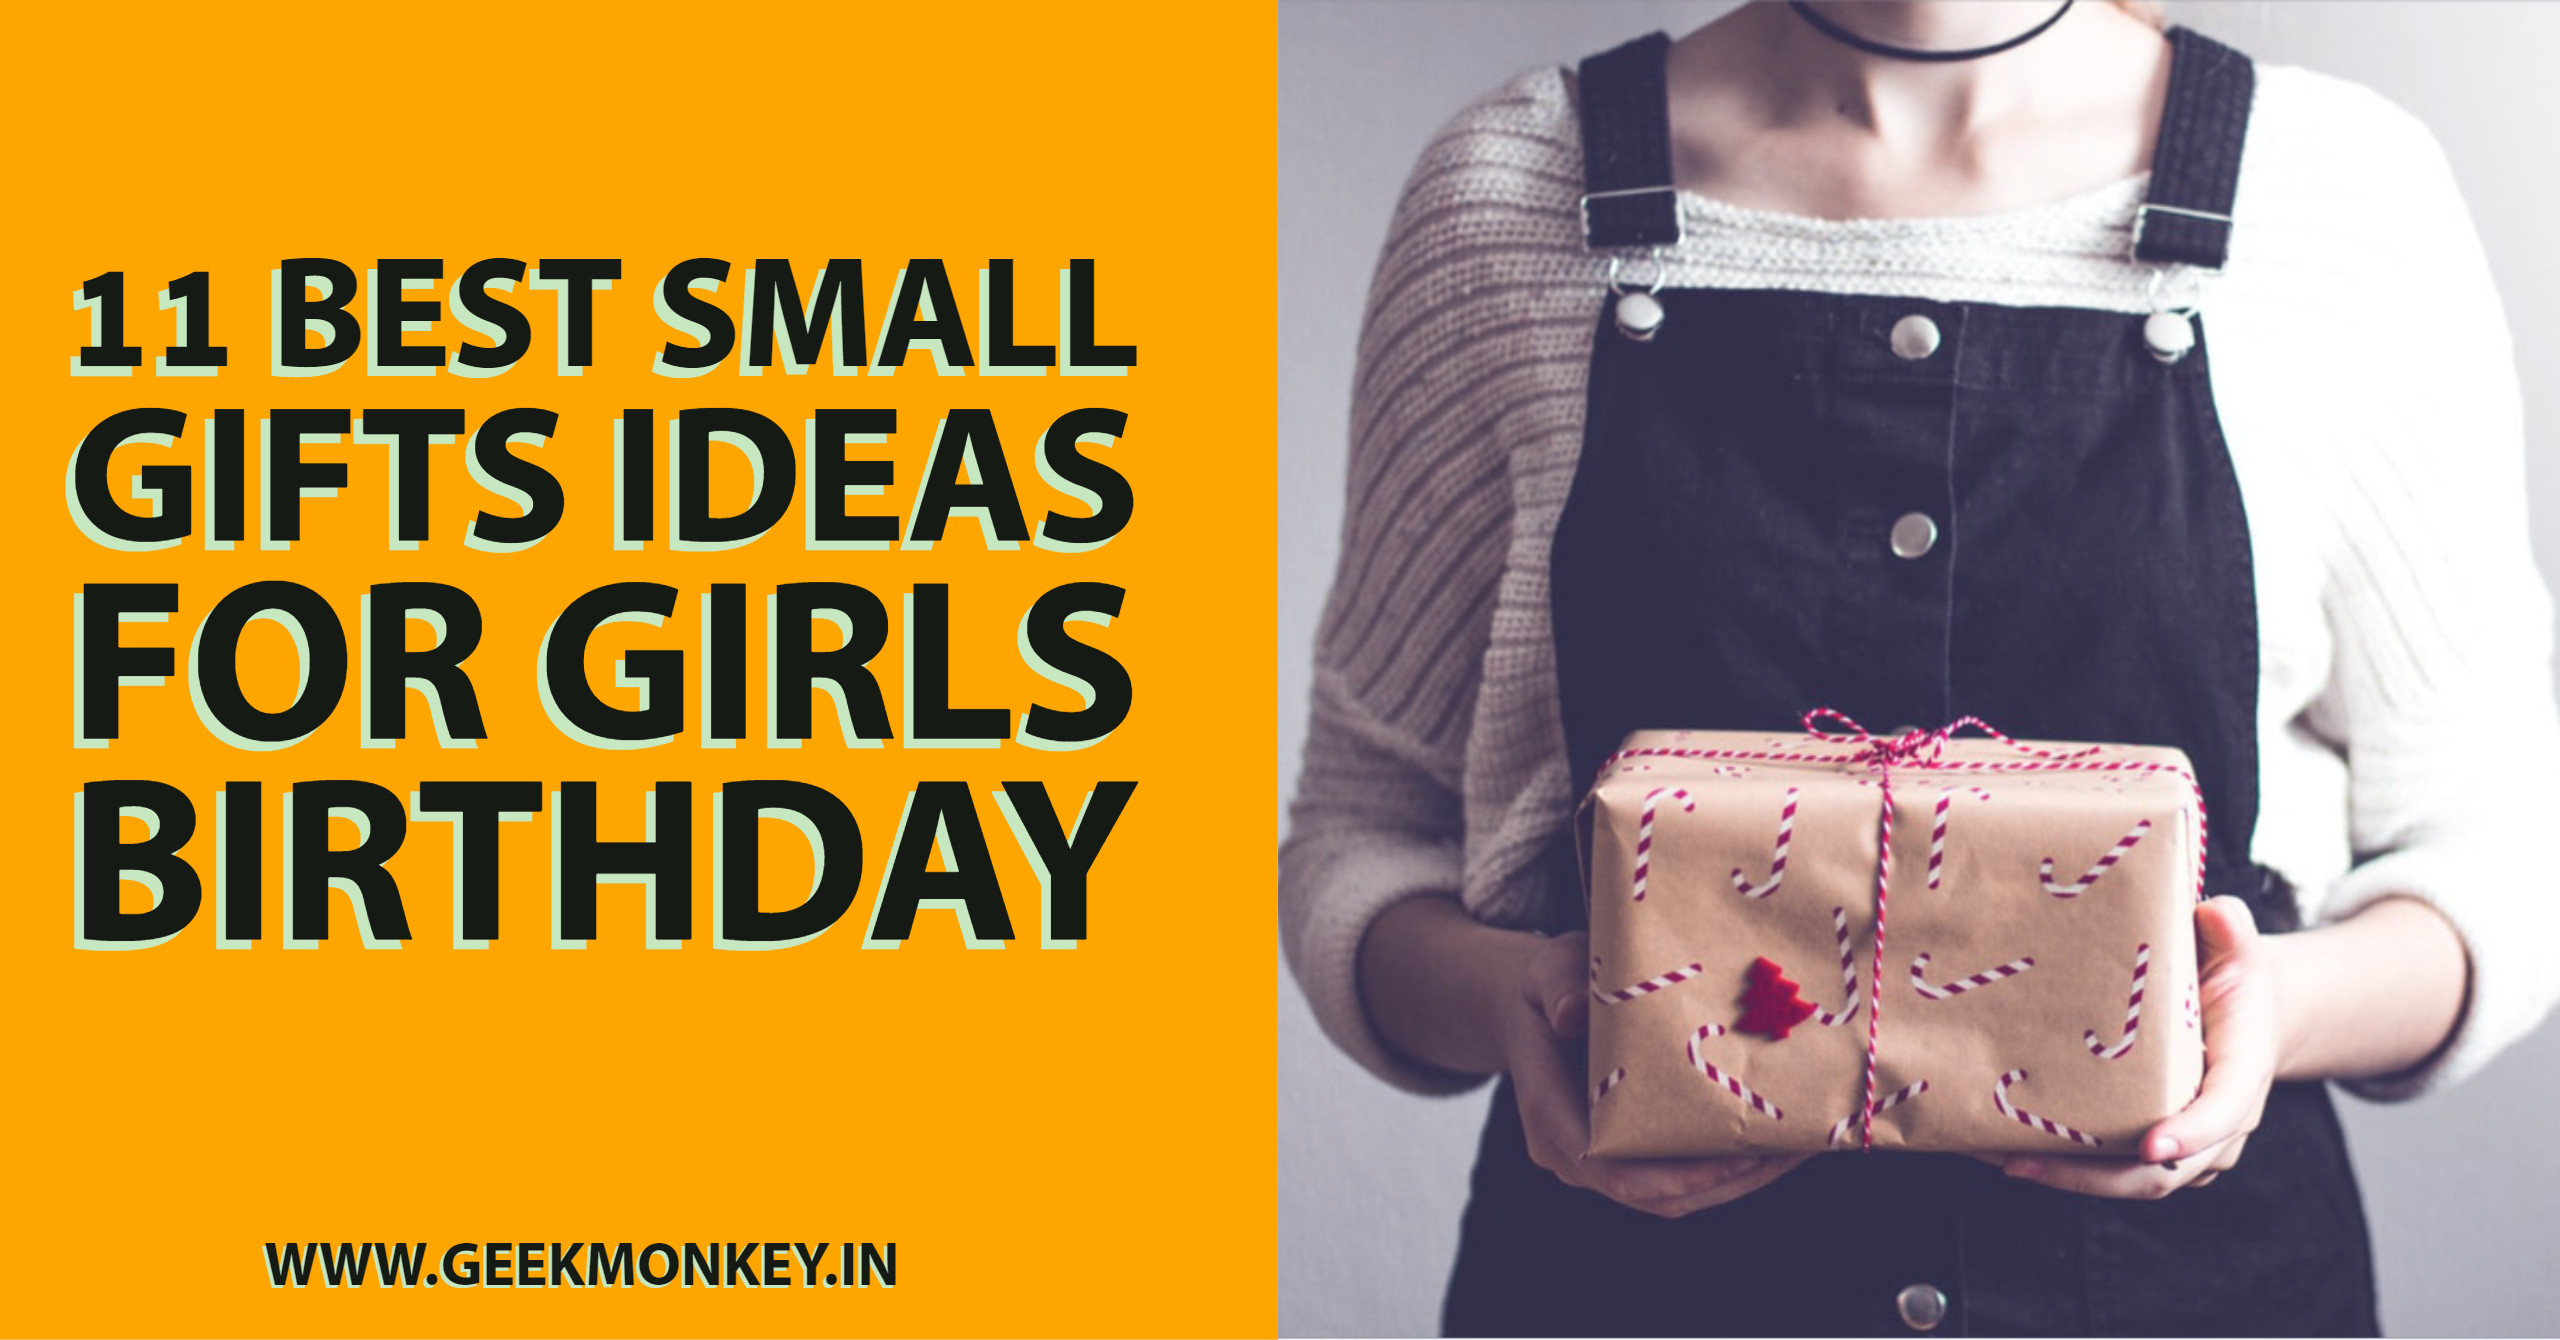 Small Gift Ideas For Girls
 11 Best Small Gifts Ideas for Girls Birthday